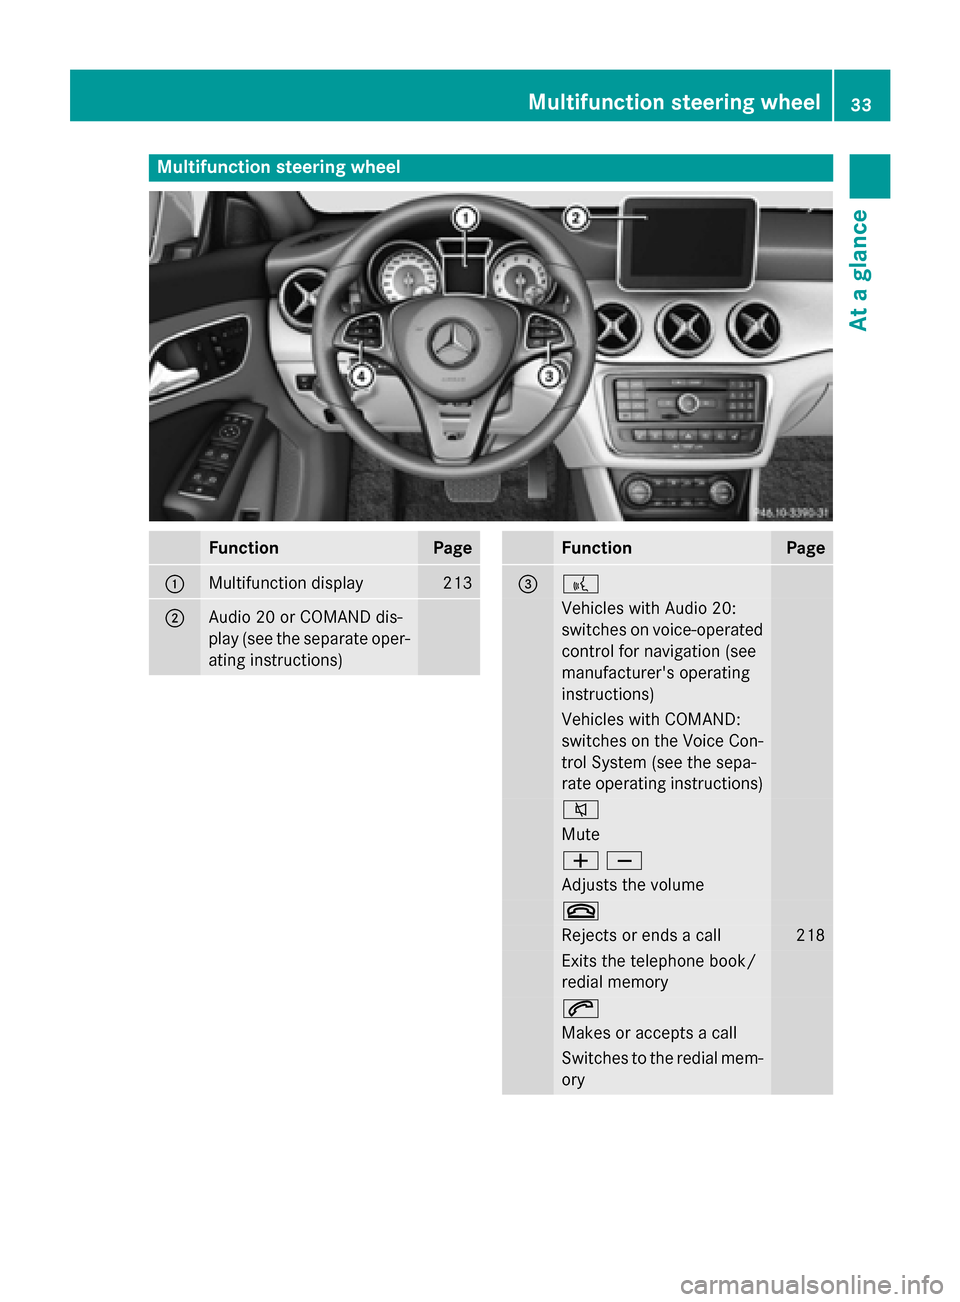 MERCEDES-BENZ CLA-Class 2016 C117 Owners Manual Multifunction steering wheel
FunctionPage
:Multifunction display213
;Audio 20 or COMAND dis-
play (see the separate oper-
ating instructions)
FunctionPage
=?
Vehicles with Audio 20:
switches on voice-